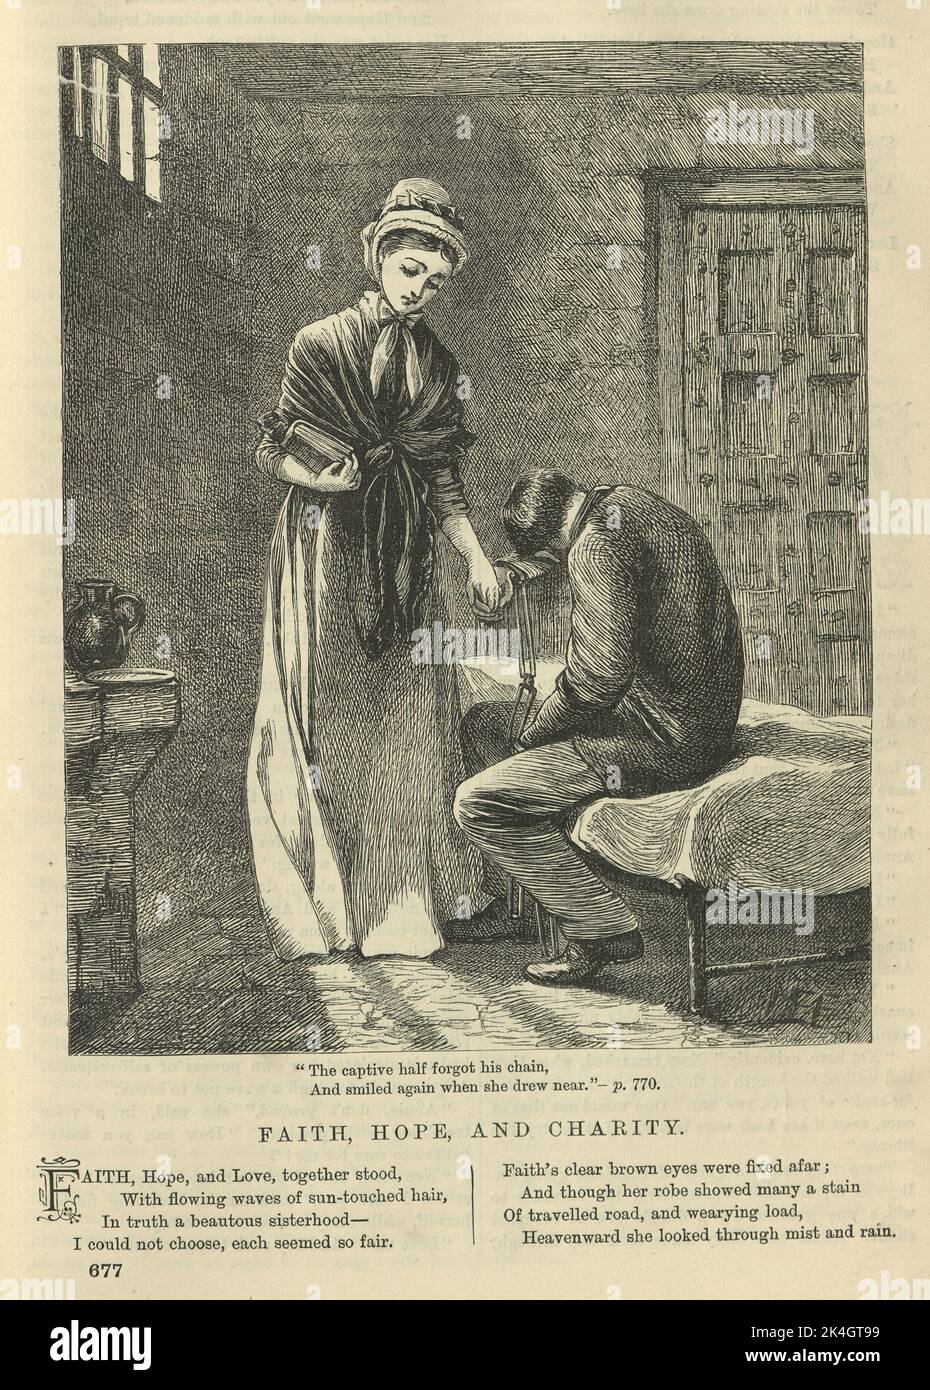 Illustrated Victorian poem, Faith hope and charity, Young woman visiting a man in prison, Poetry, 1870s, 19th Century Stock Photo